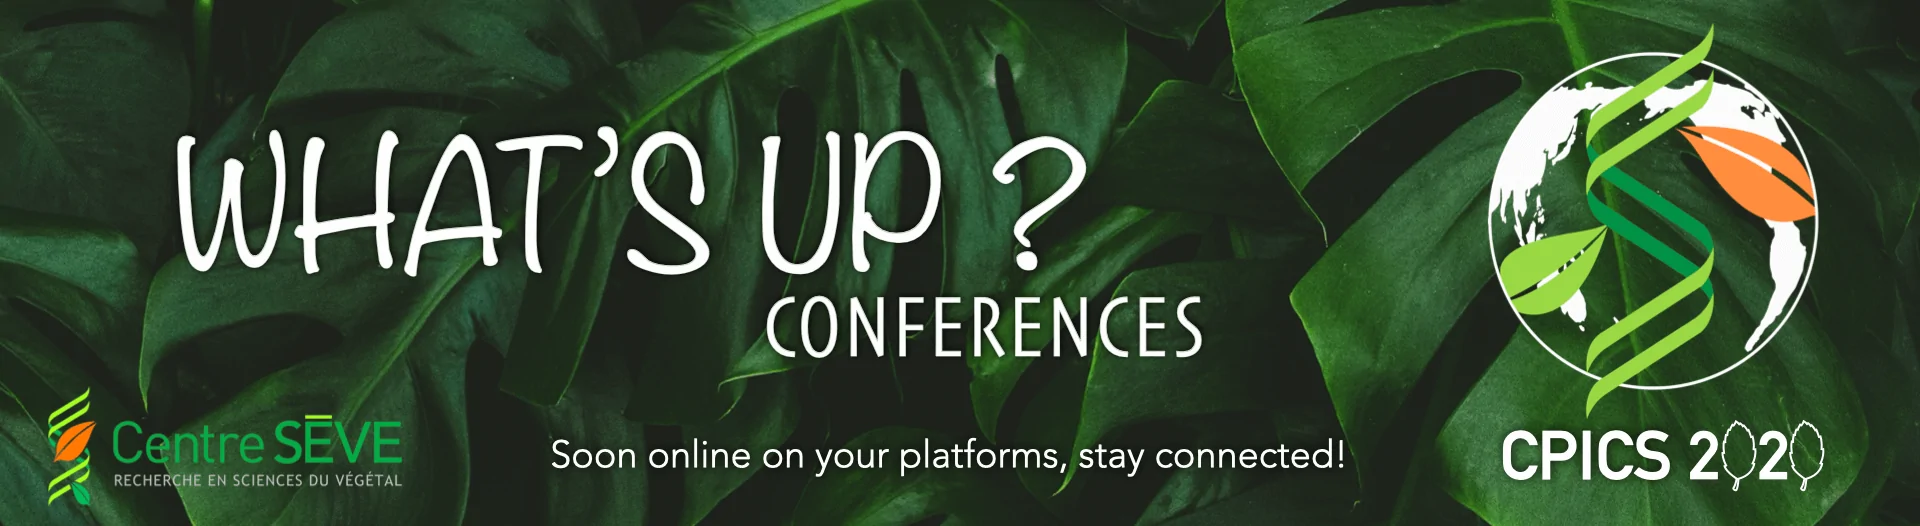 Banner for What's up? Conferences